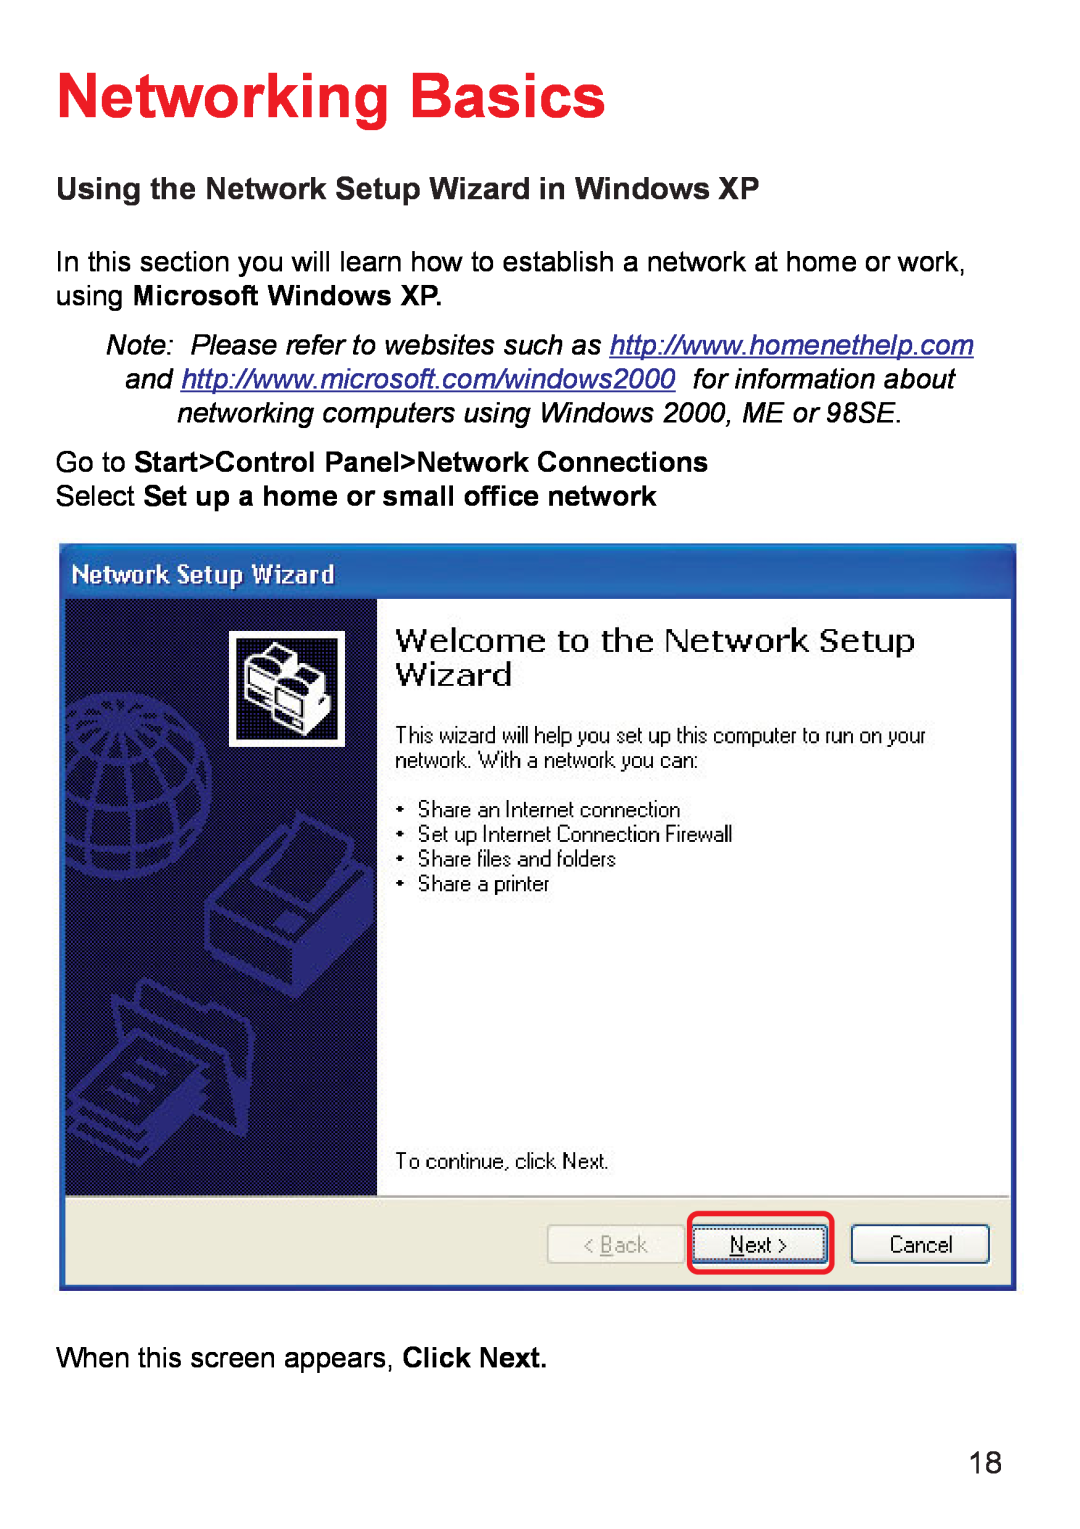 D-Link DWL-120+ manual Networking Basics, Using the Network Setup Wizard in Windows XP 